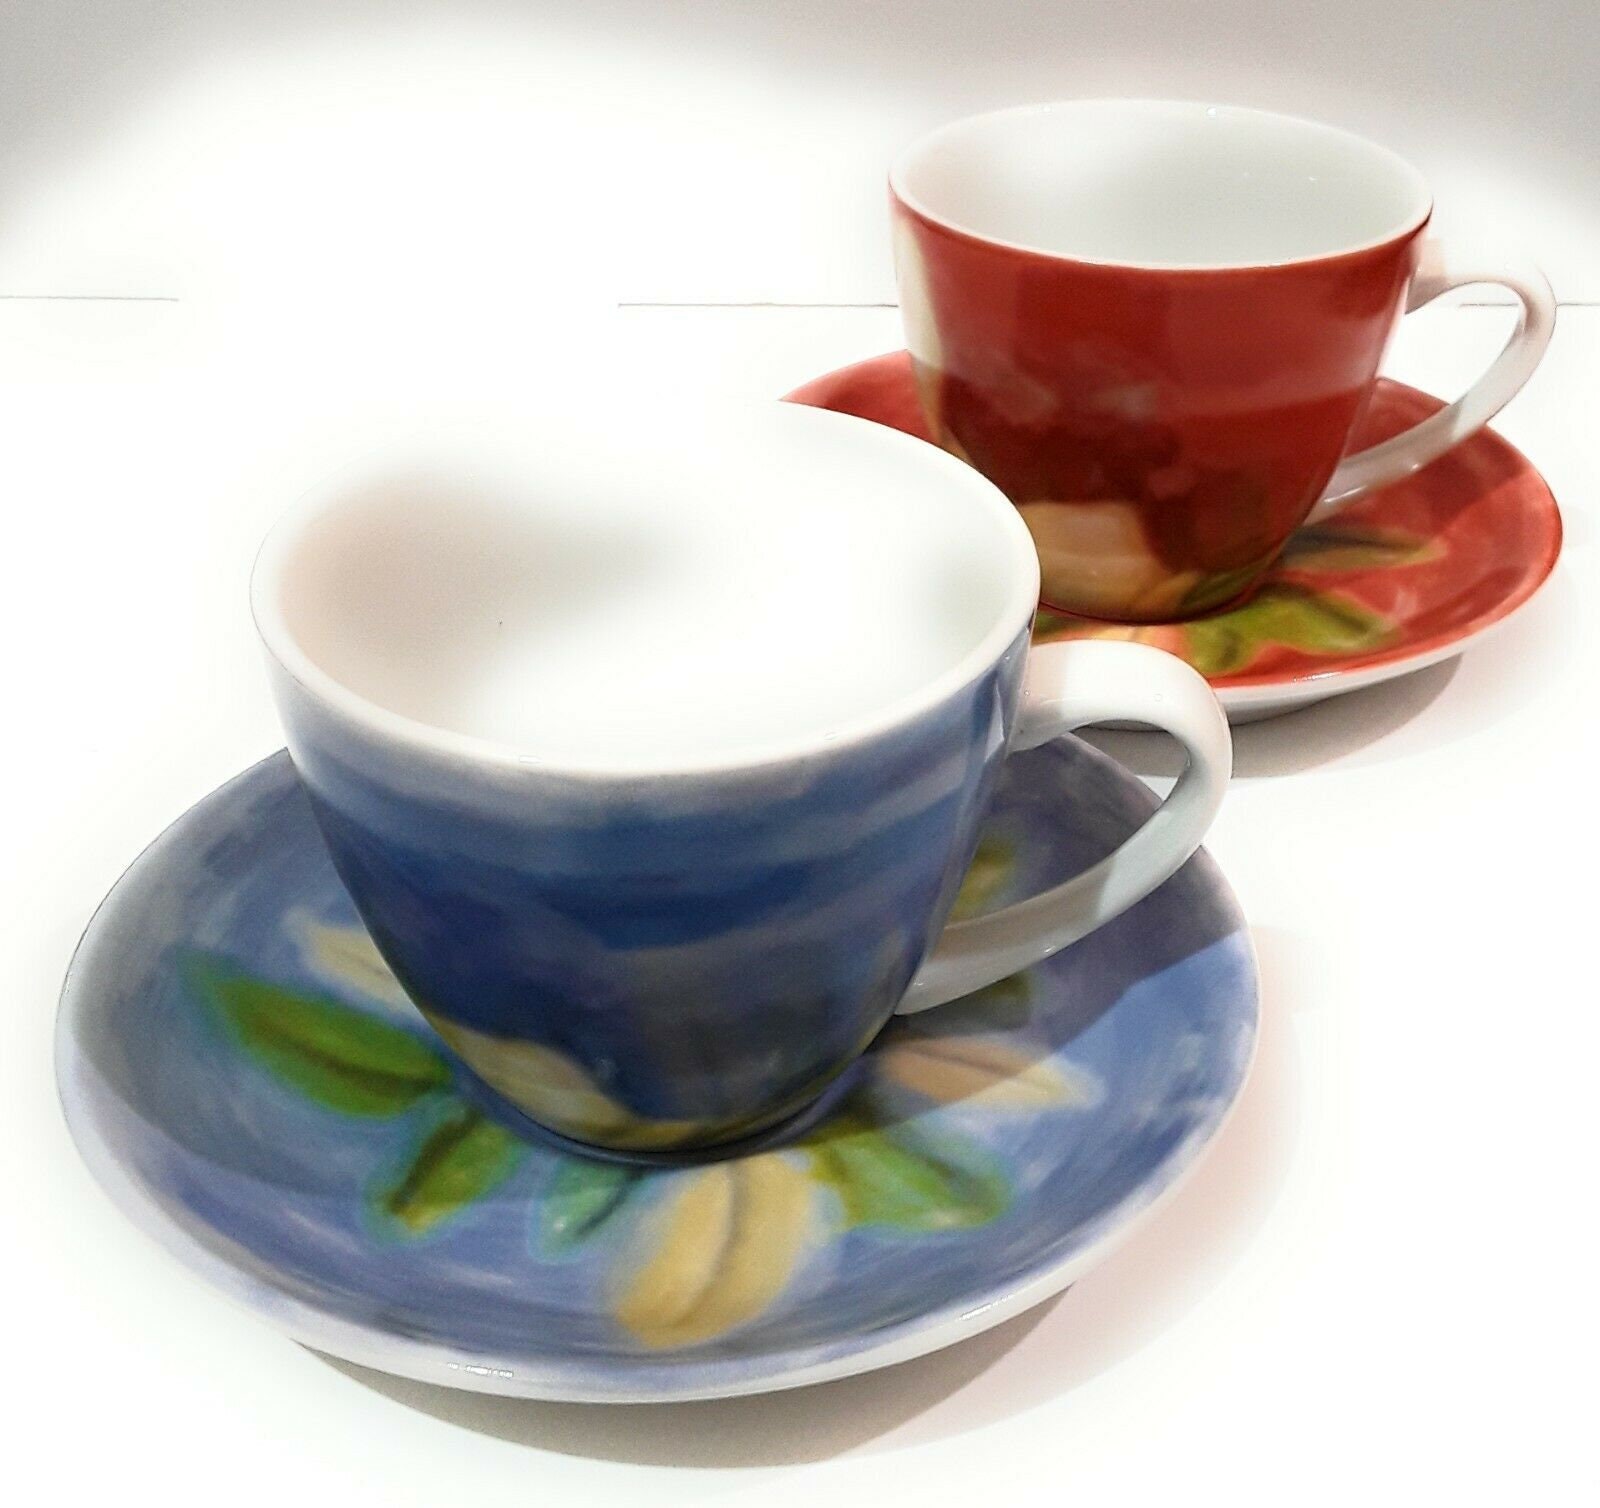 Cappuccino Cup & Saucer - Ledmore